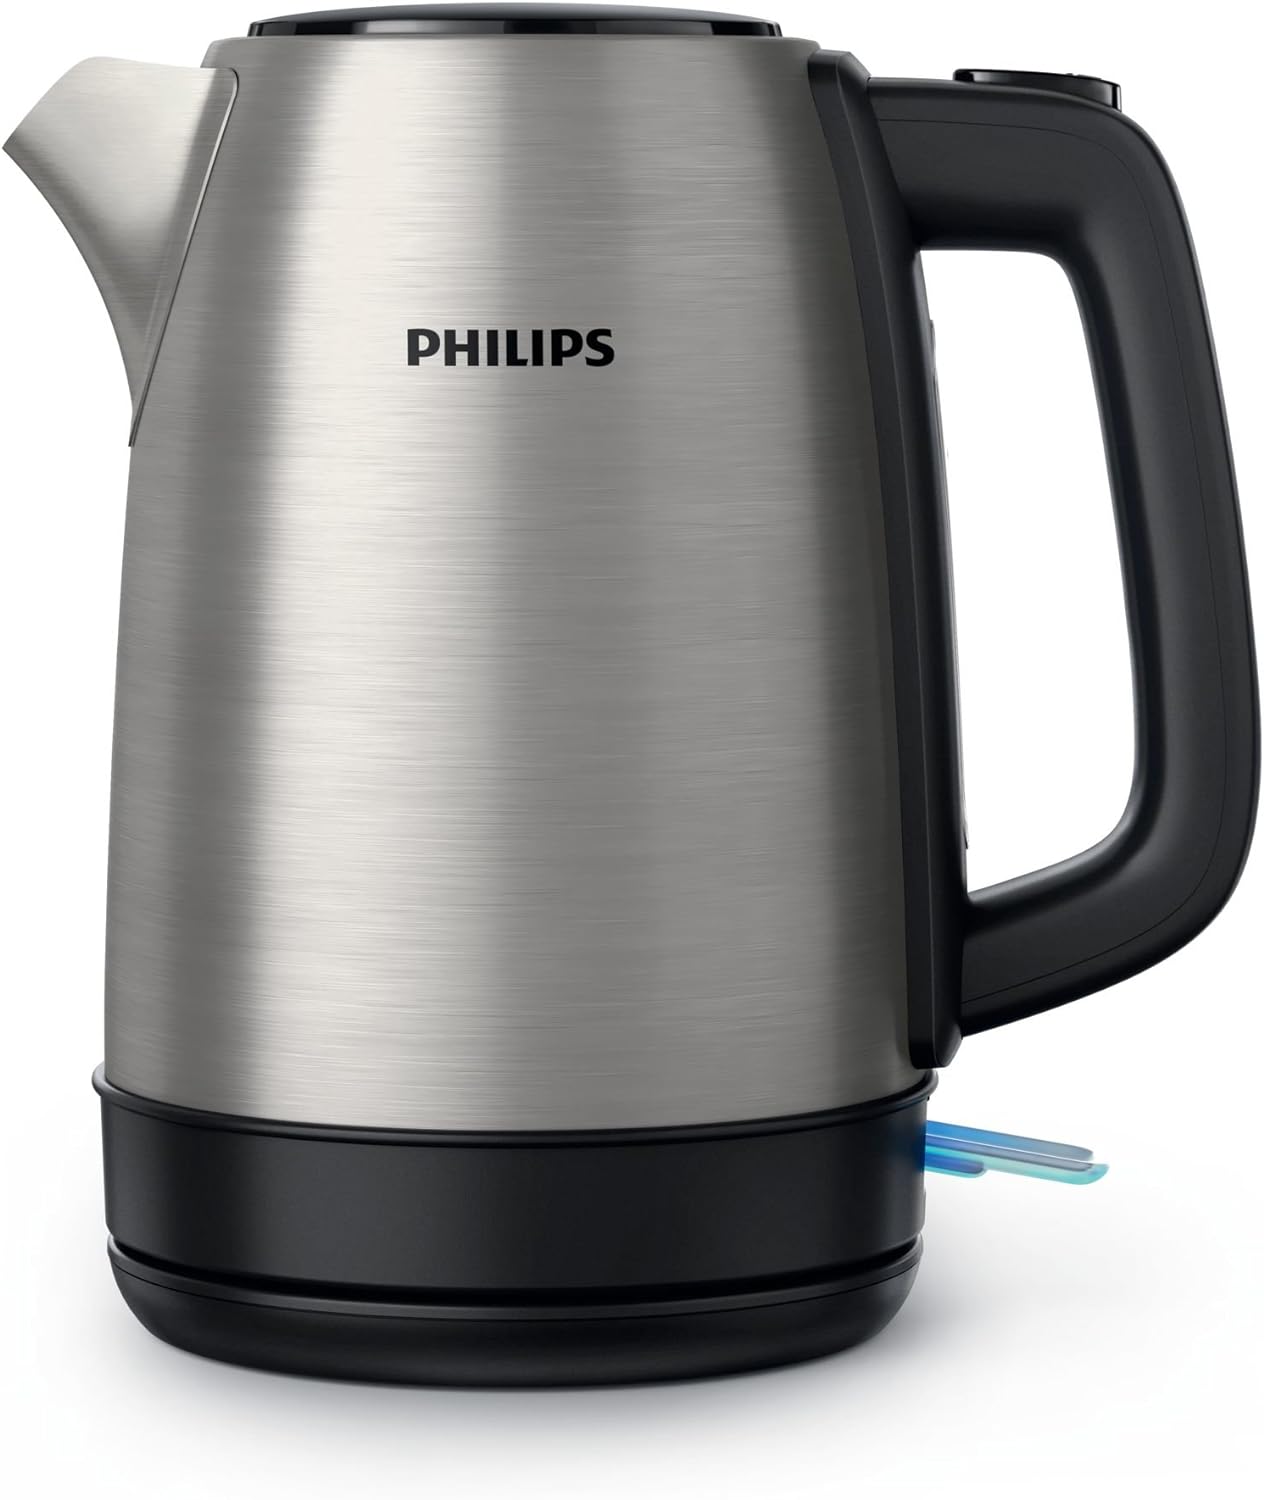 Philips Electric Kettle - 1.7L Capacity with Spring Lid and Indicator Light, Stainless Steel, Pirouette Base (HD9350/92), Silver - Amazing Gadgets Outlet